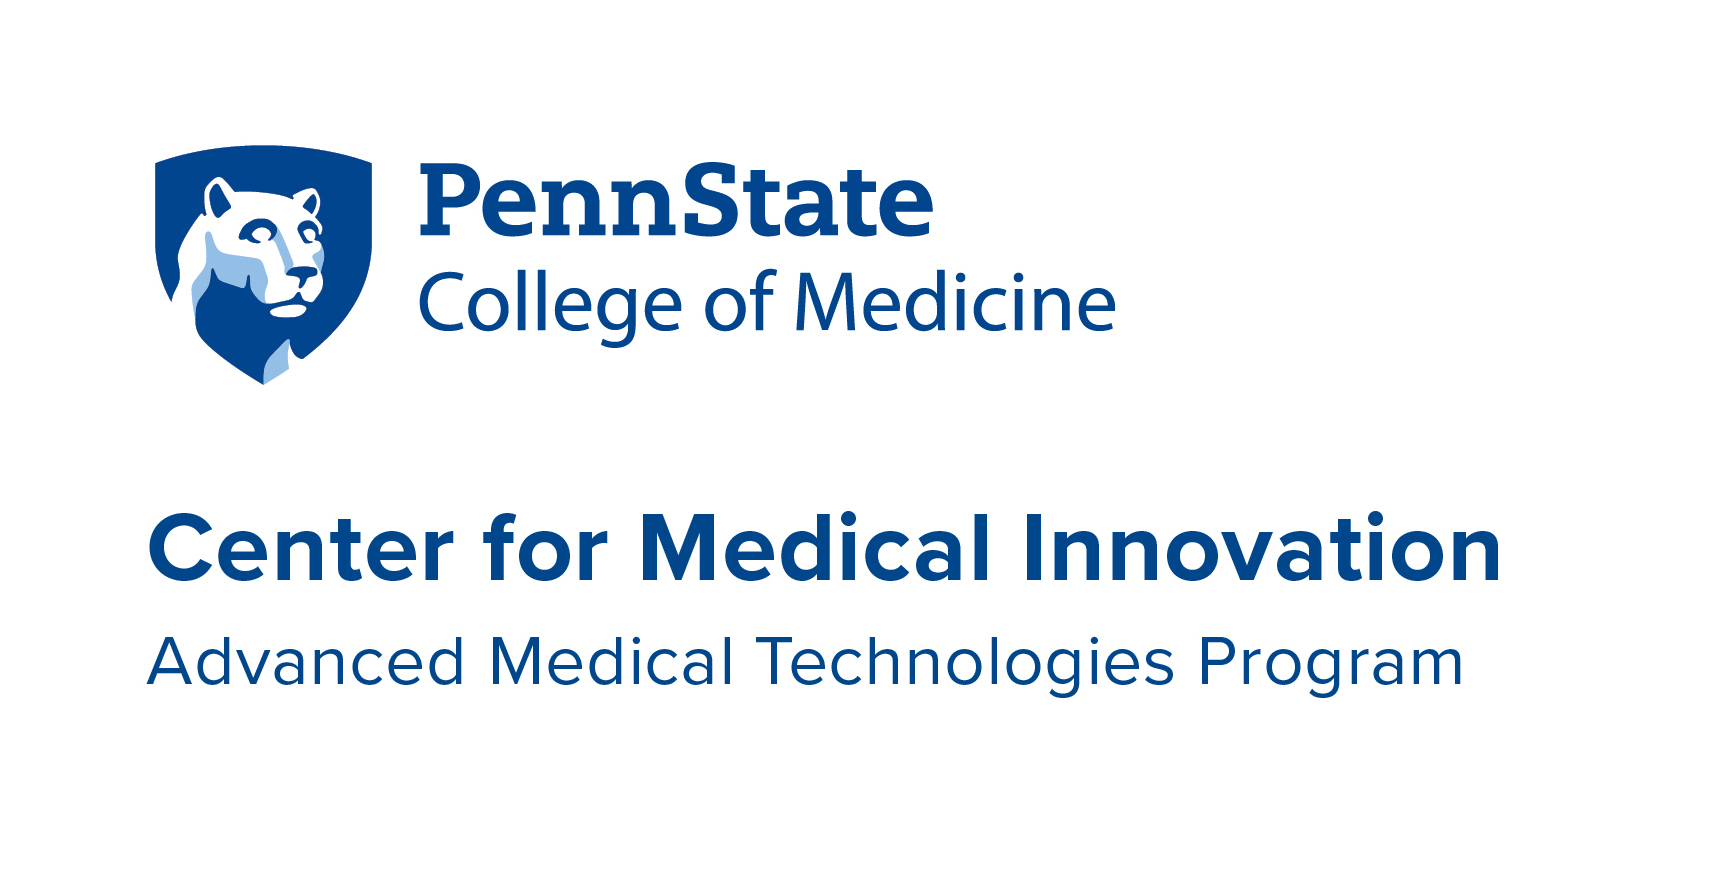 Penn State College of Medicine mark with Center for Medical Innovation and Advanced Medical Technologies Program below it.